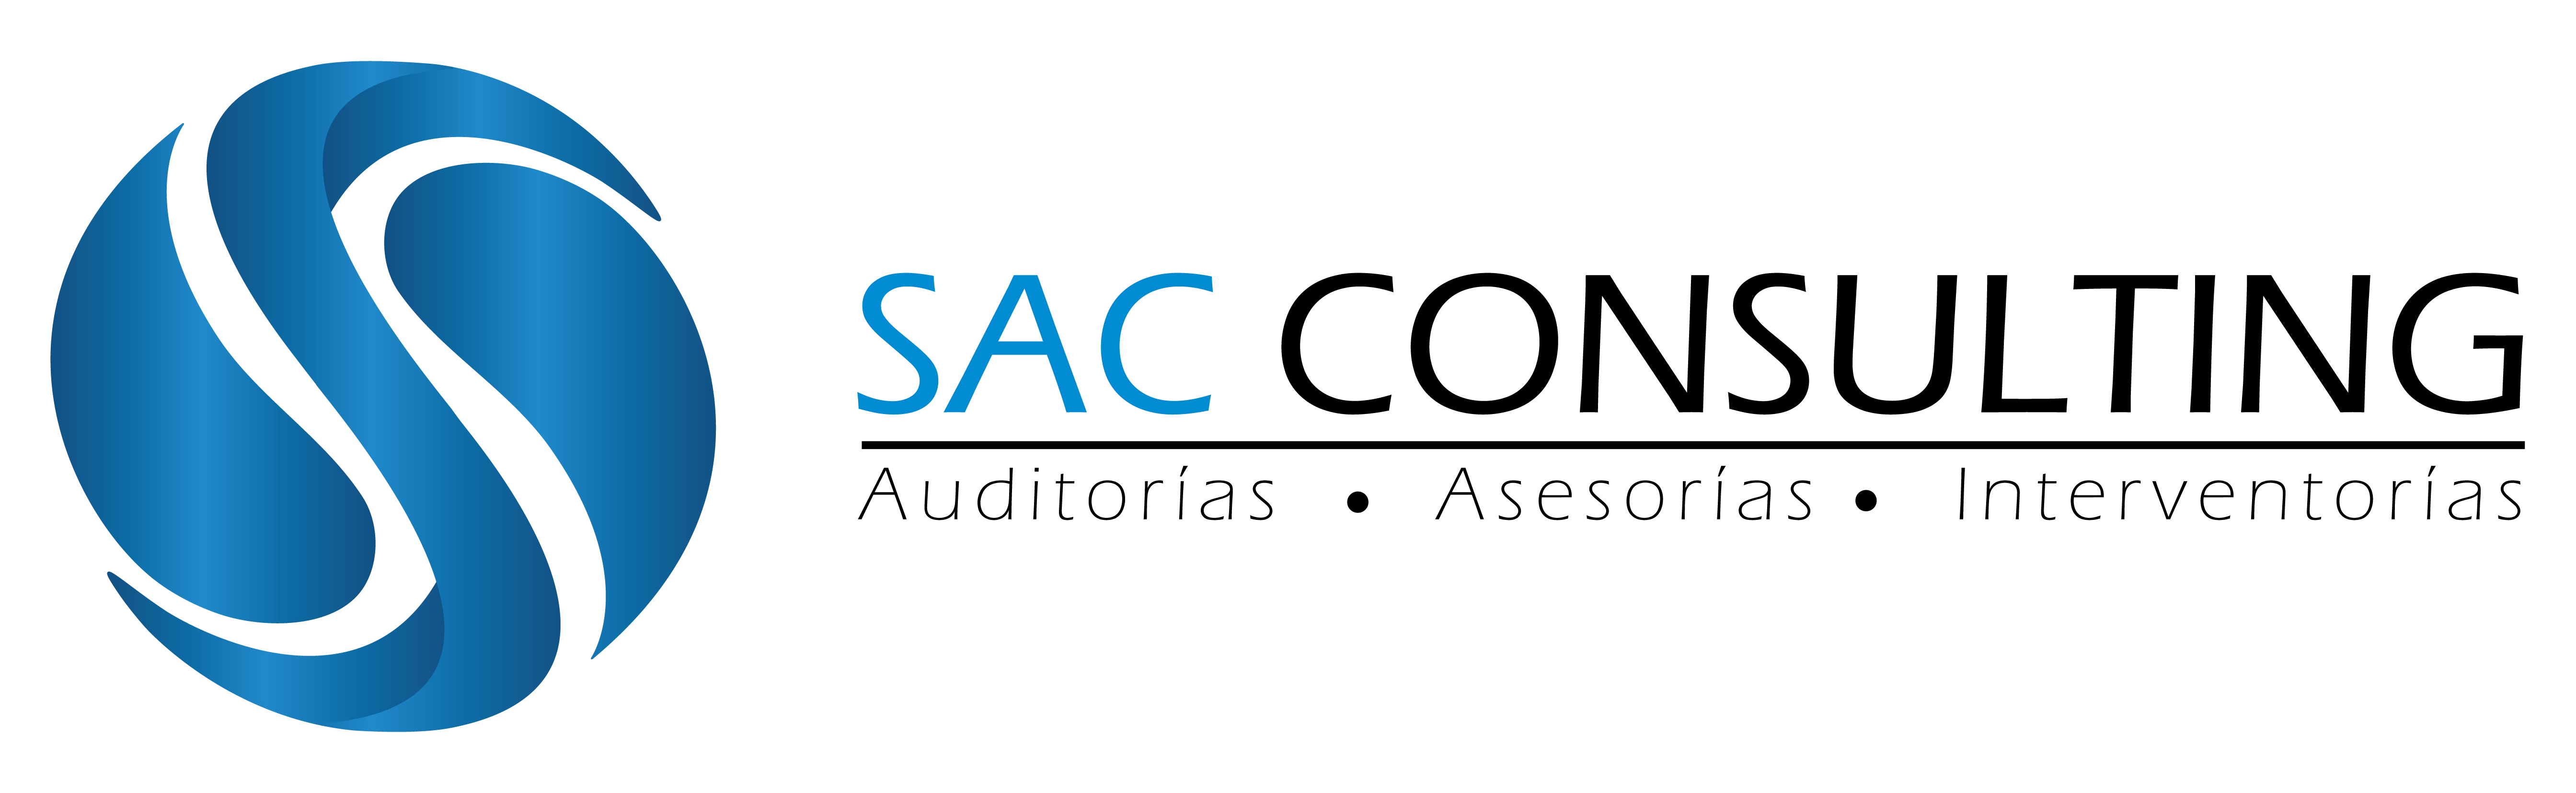 SAC Consulting